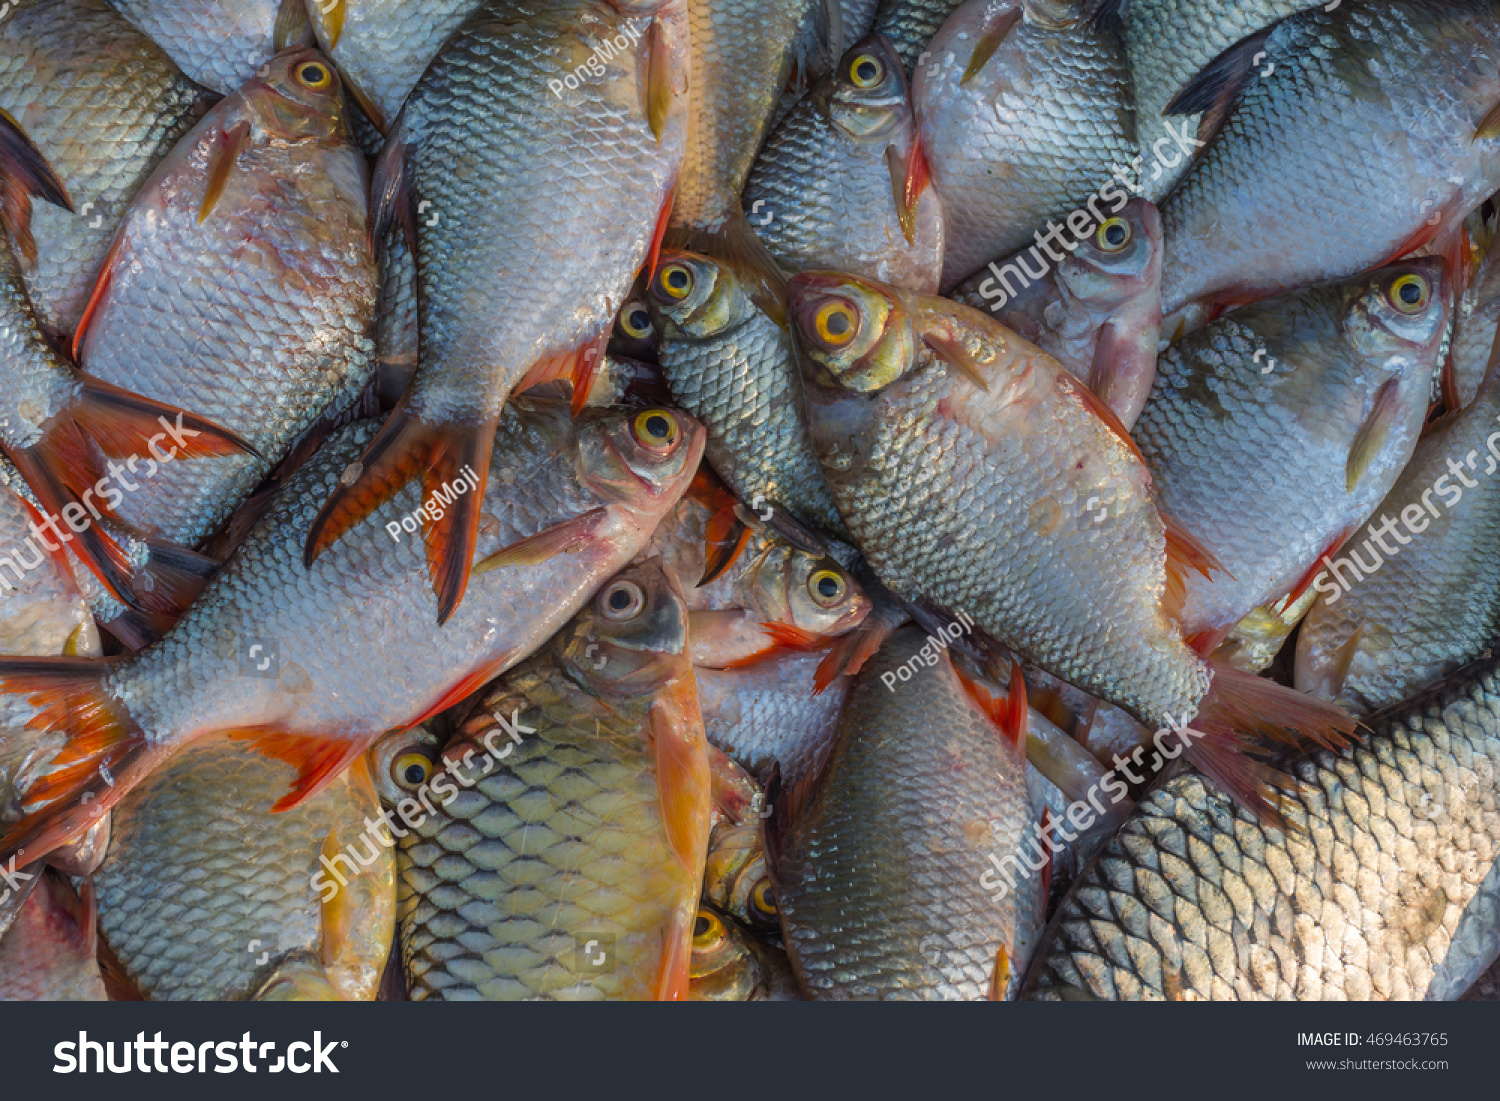 freshwater fish for sale